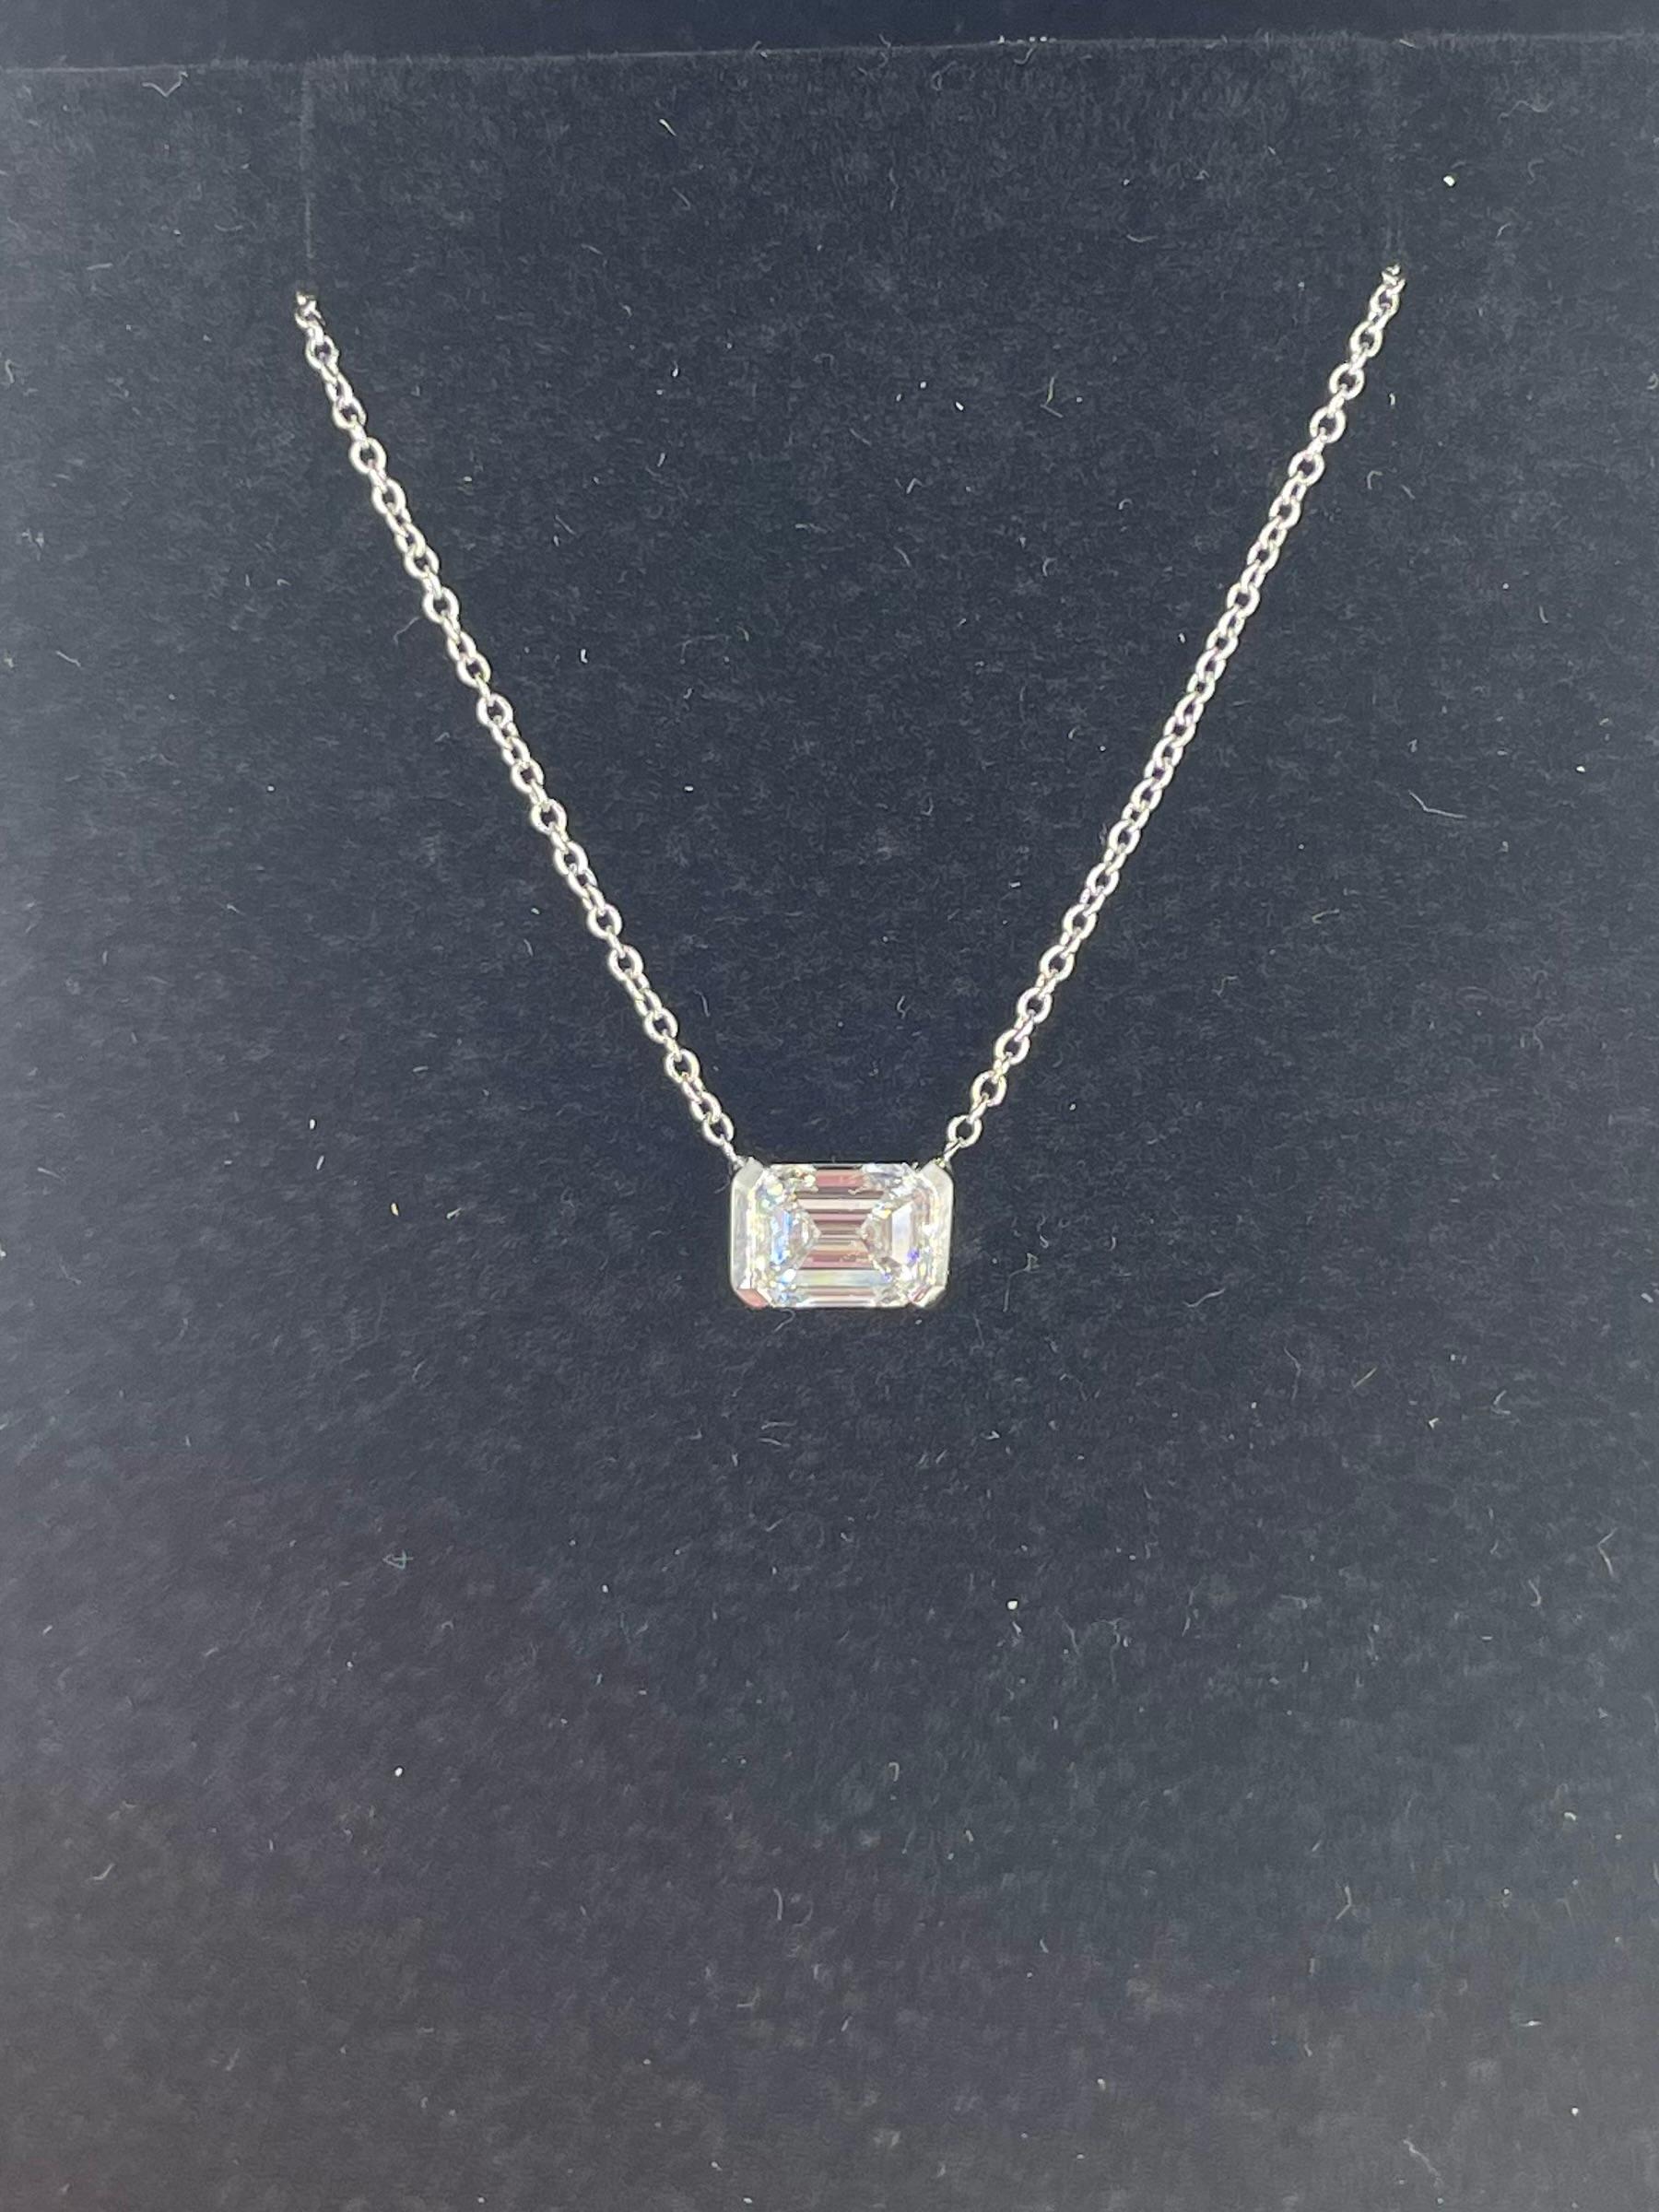 This sophisticated pendant is the perfect piece to wear and love everyday. Large enough to make a statement on its own or layered with other pieces, this is an elegant addition to your jewelry collection. The GIA certified diamond is a 1.01 carat D